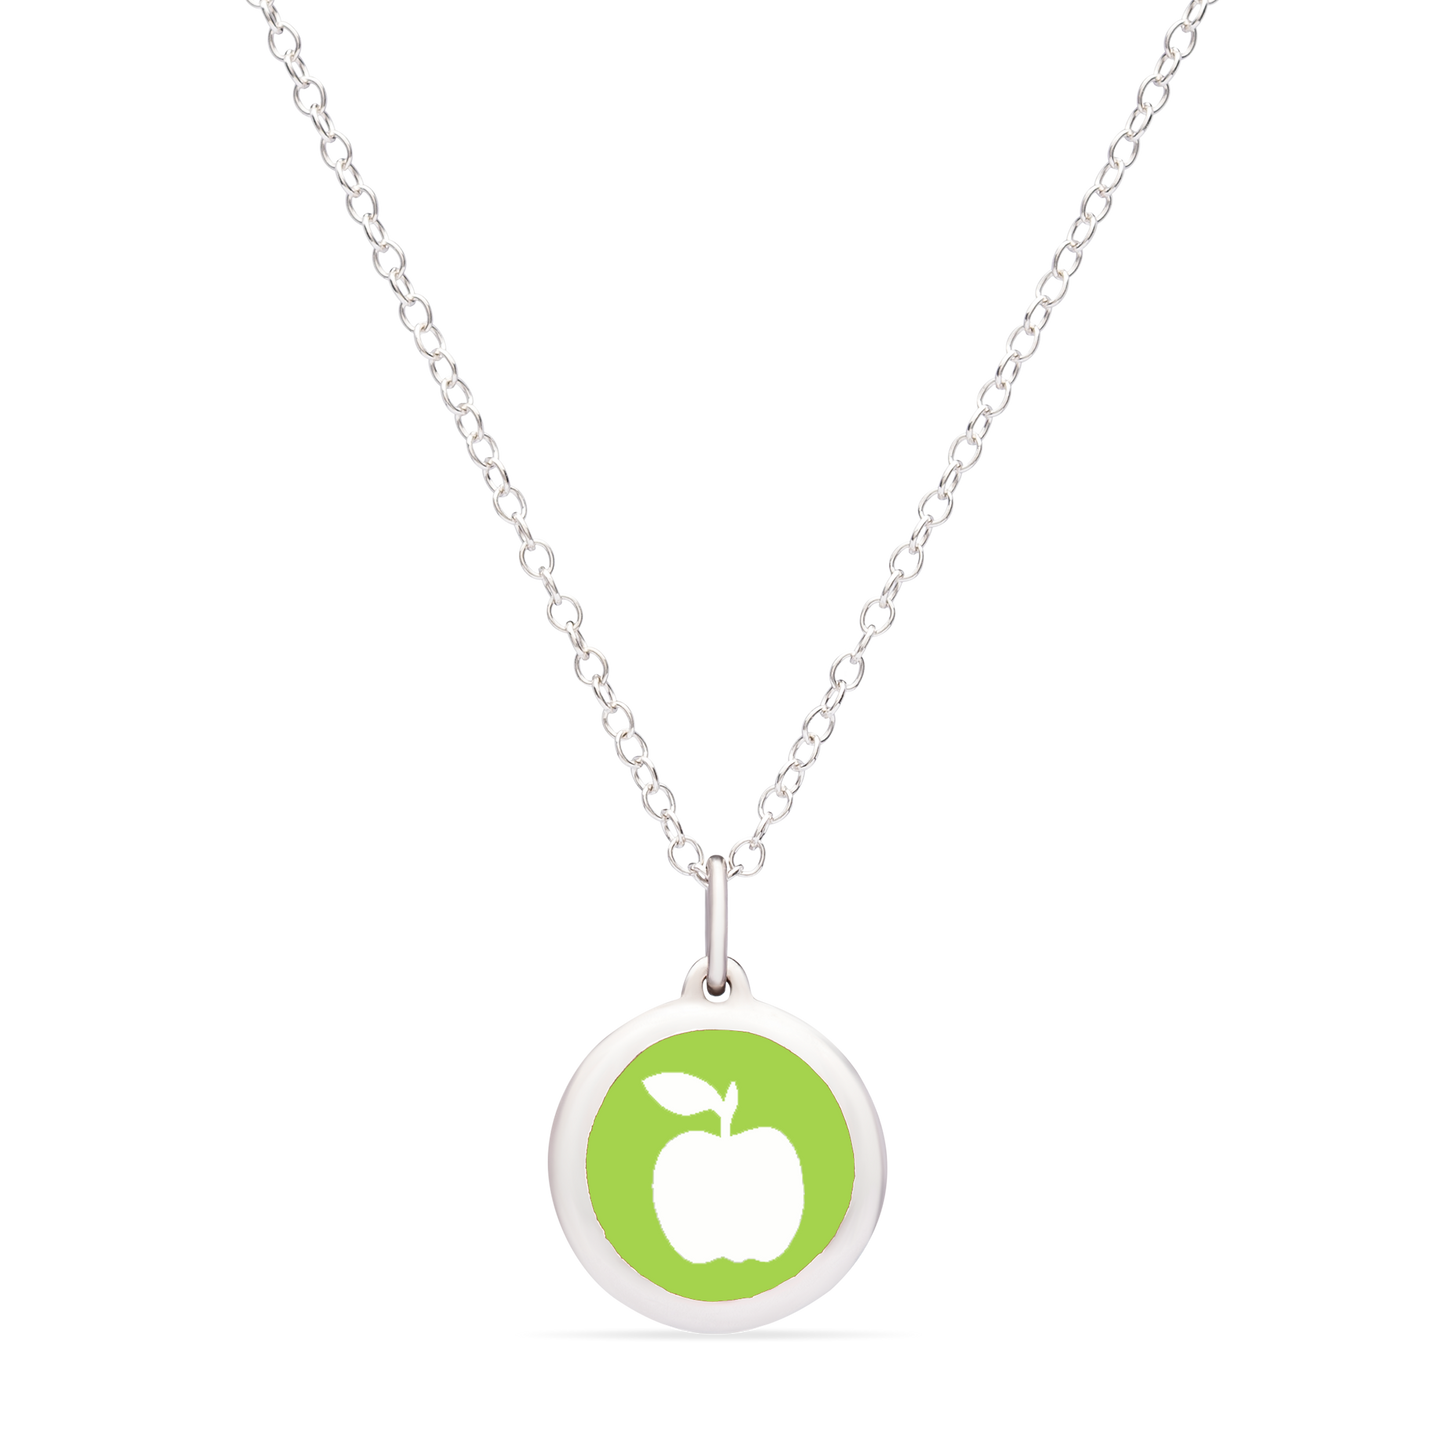 MINI APPLE CHARM sterling silver with rhodium plate